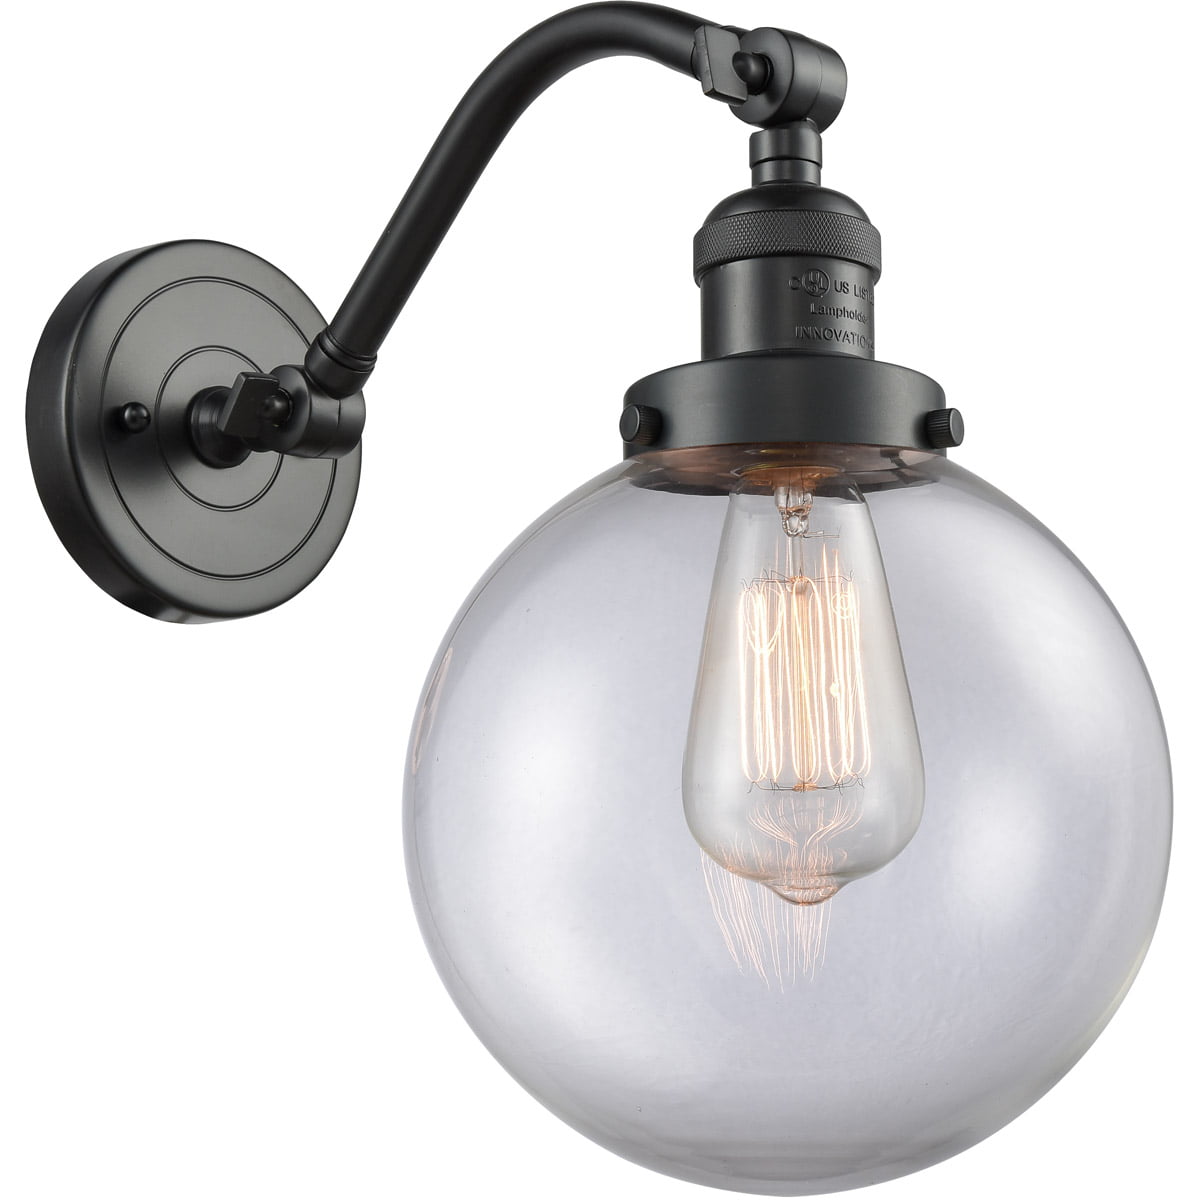 Phansthy Retro Industrial Wall Lights Vintage Wall Sconces with Globe Glass for 